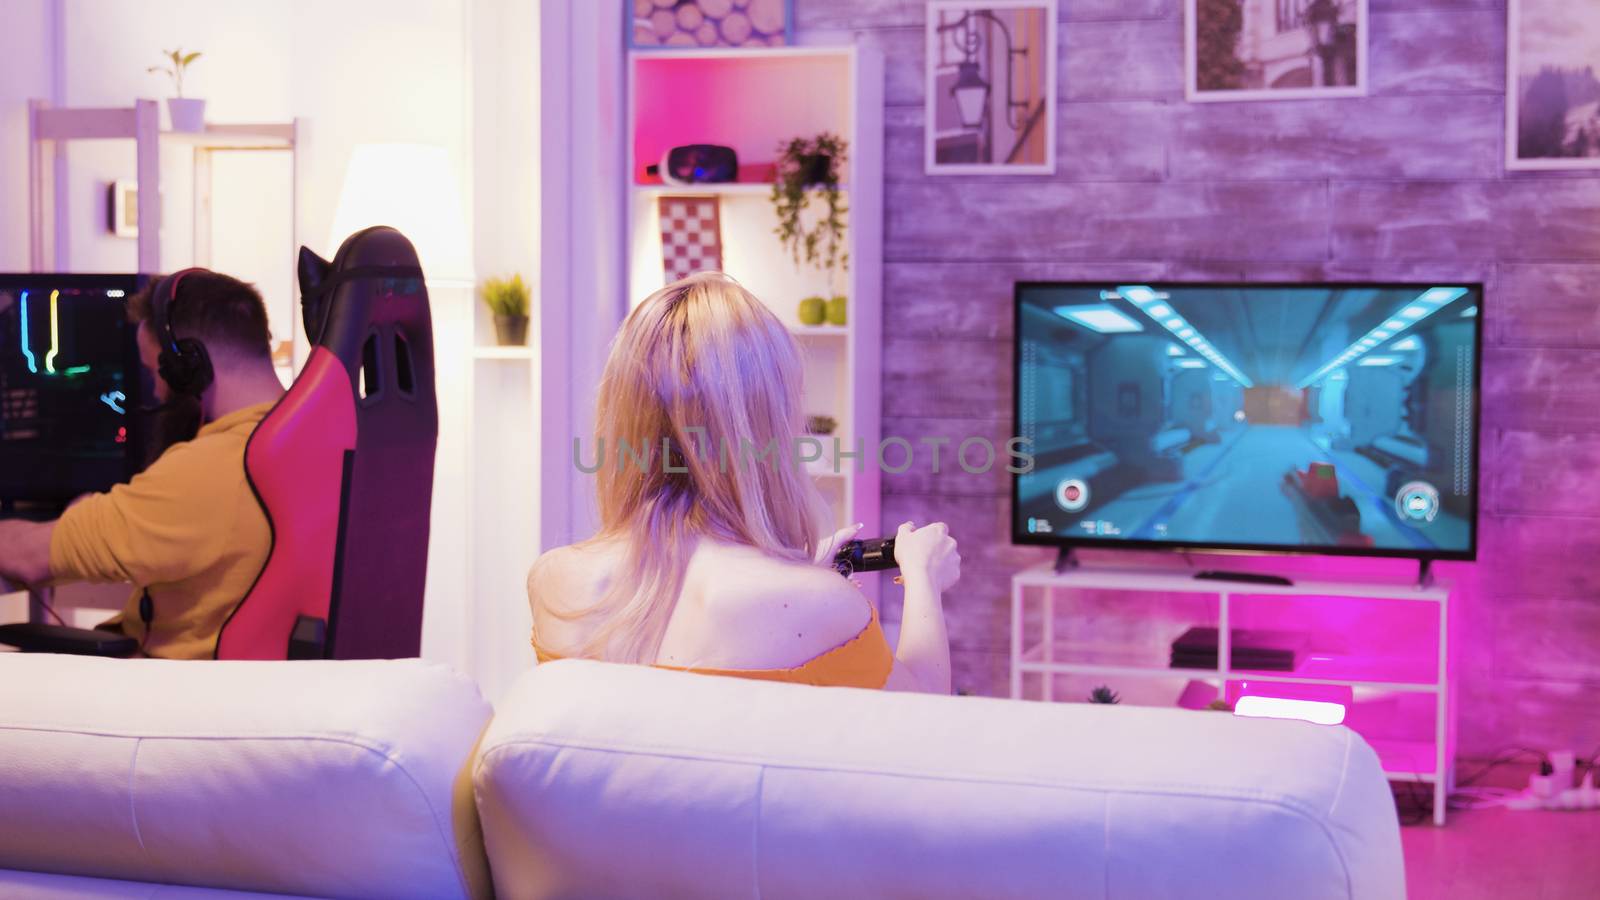 Beautiful young woman happy to win at online video games sitting on sofa using wireless controller. Boyfriend sitting on gaming chair.